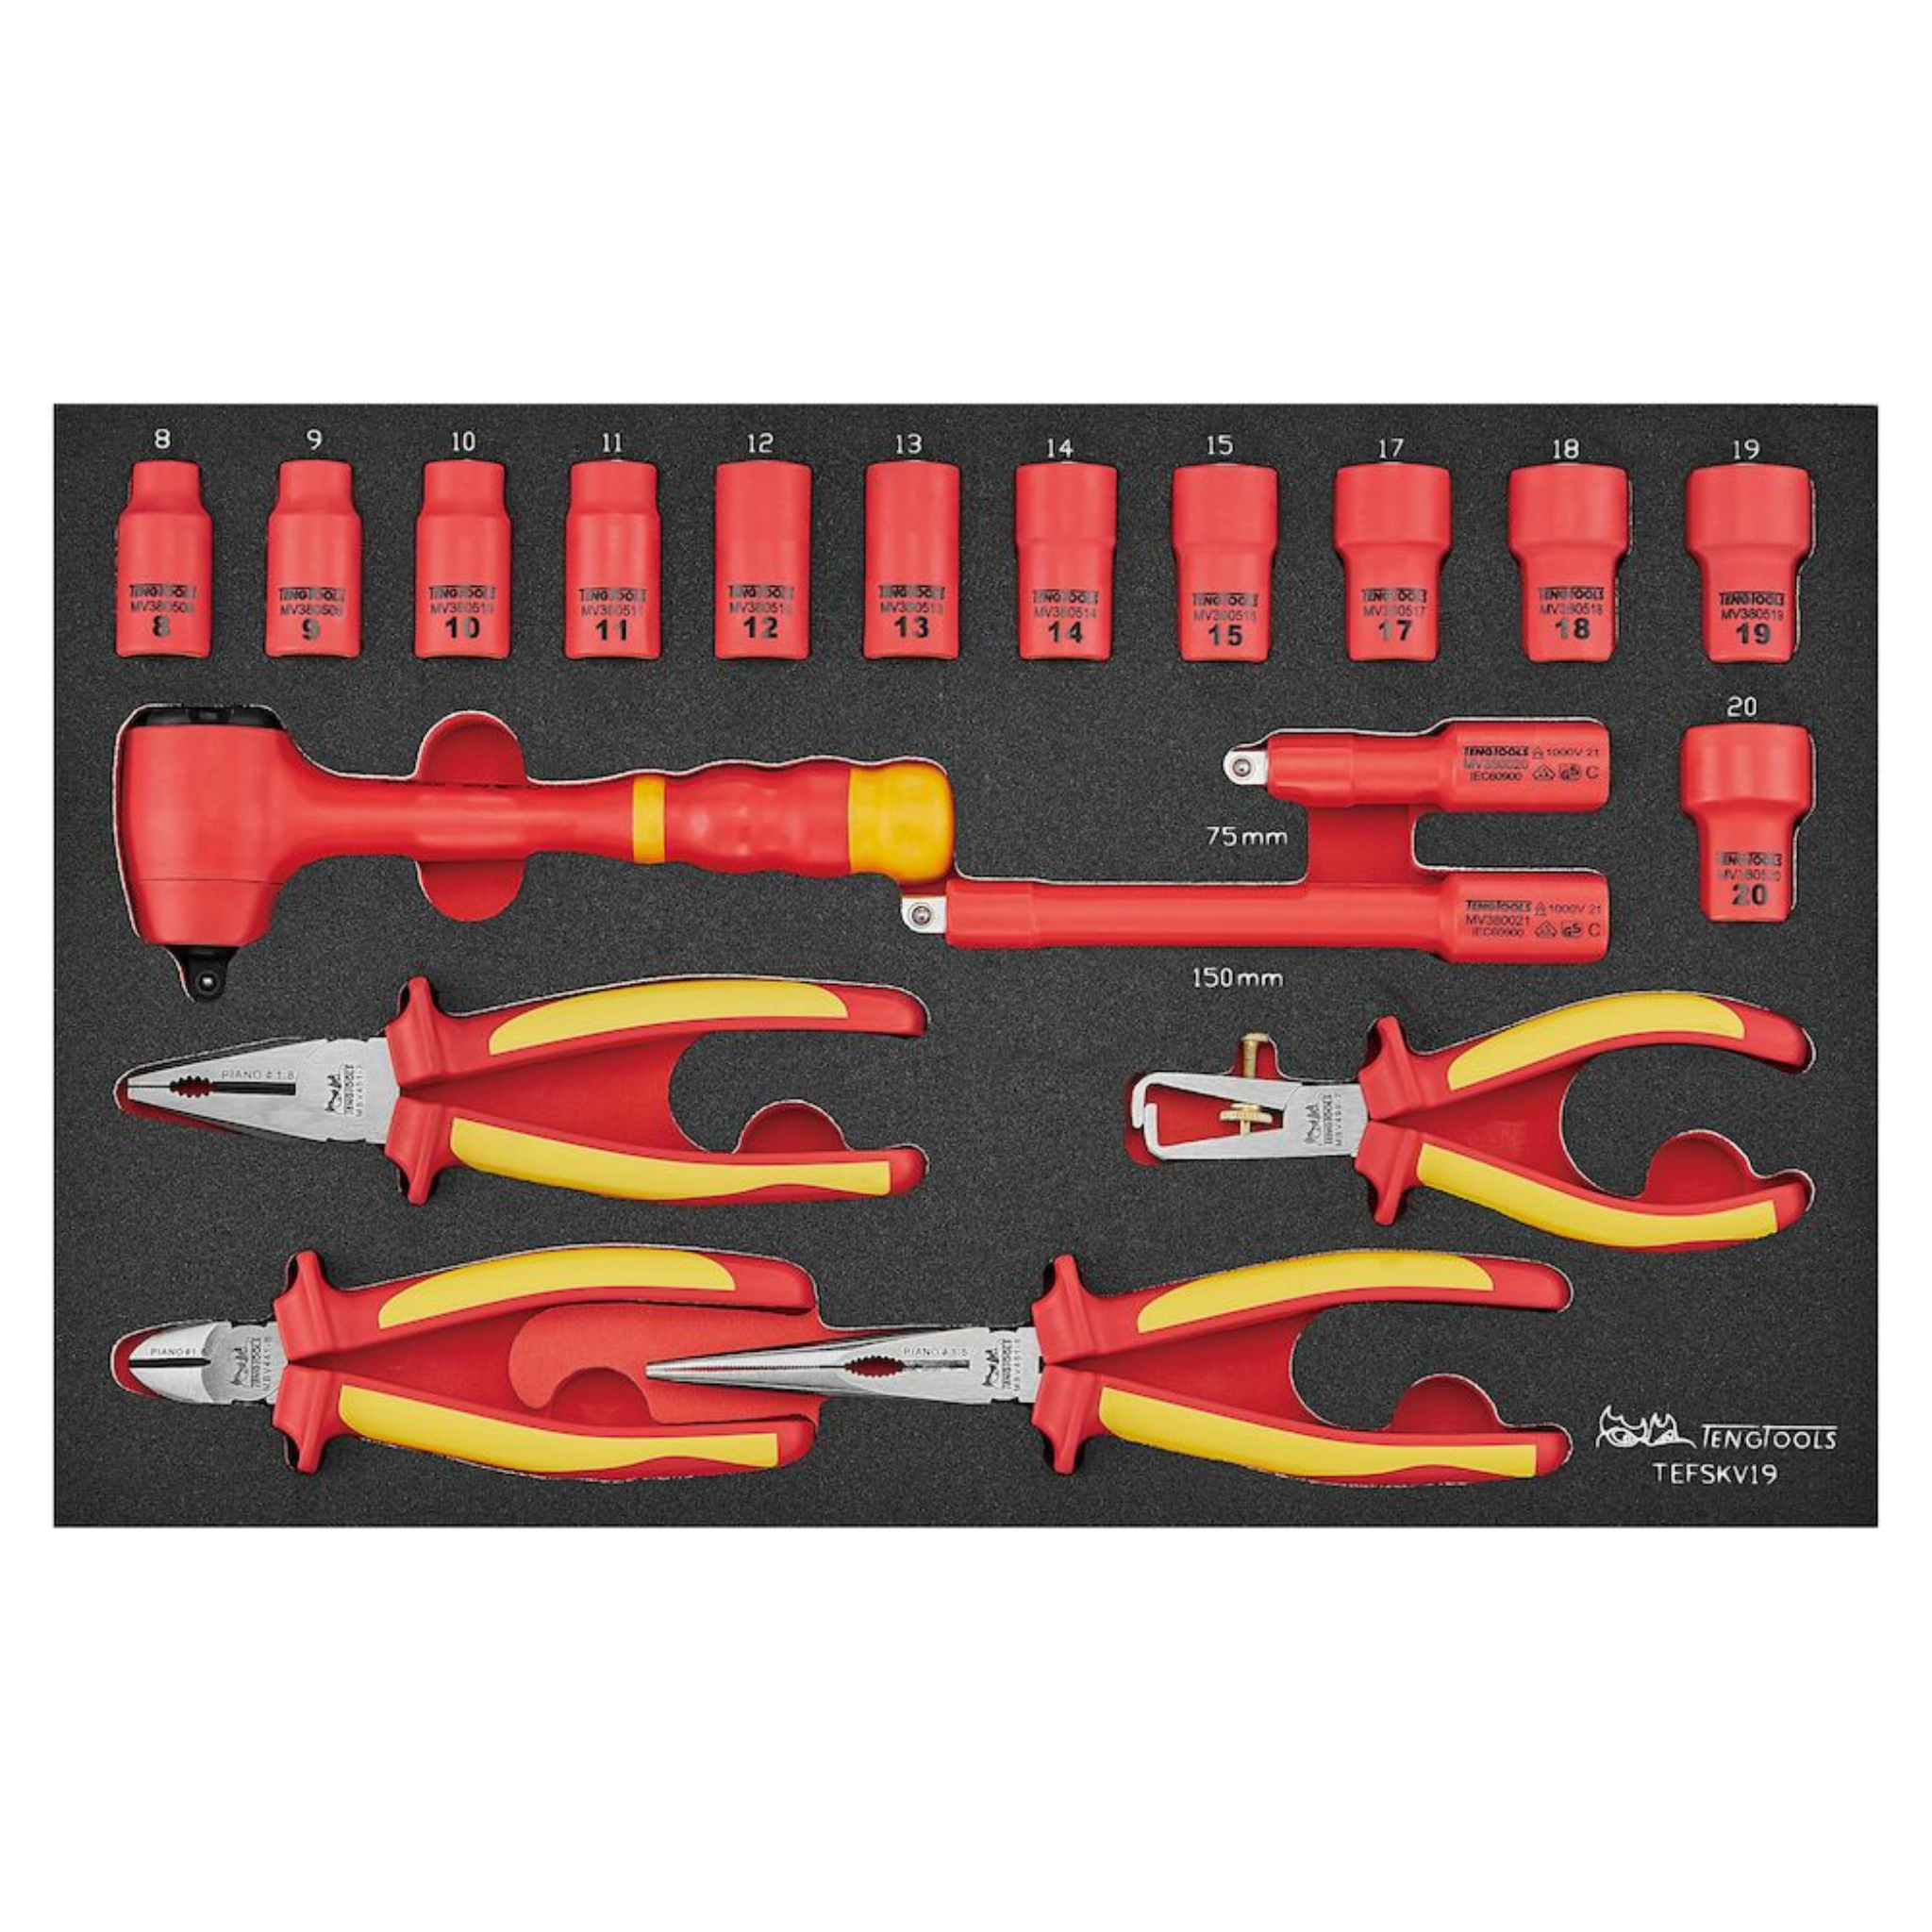 Teng Tools 37 Piece 1000 Volt Insulated Open Ended Wrench, Screwdriver, Plier & Socket Electricians Portable EVA Foam Tool Kit - TC-6TE03